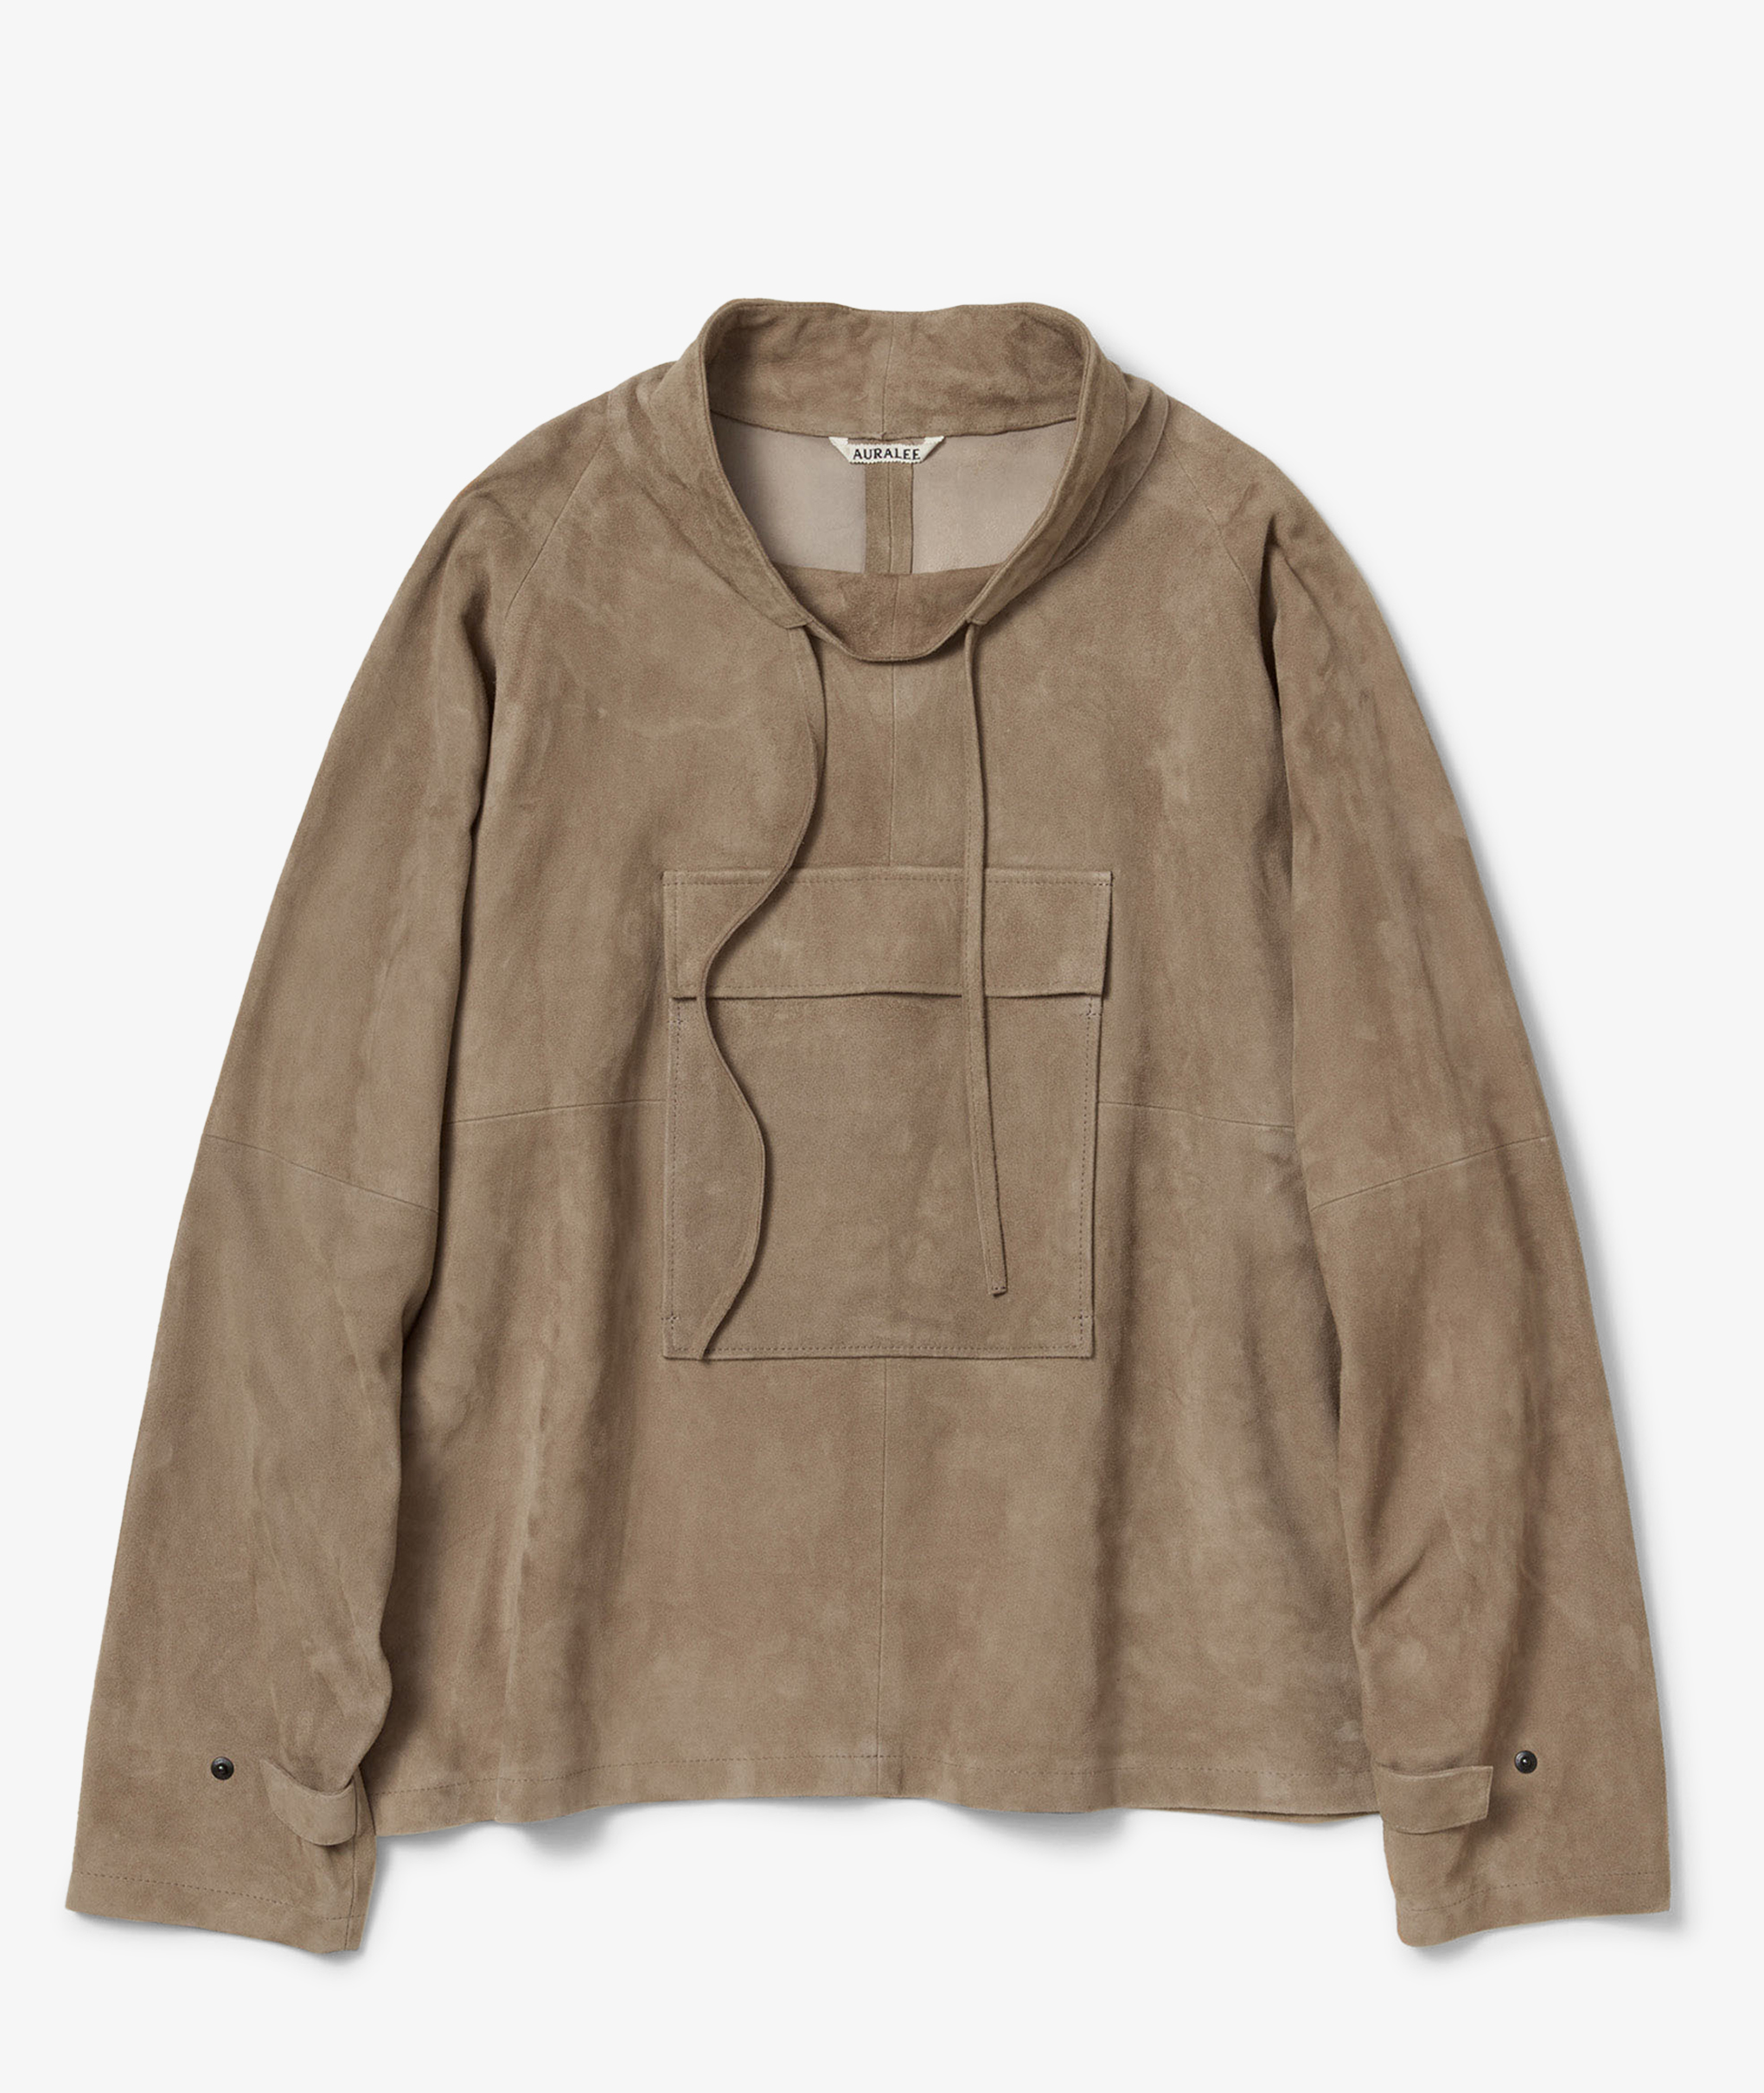 Norse Store | Shipping Worldwide - Auralee Goat Suede P/O Blouson 